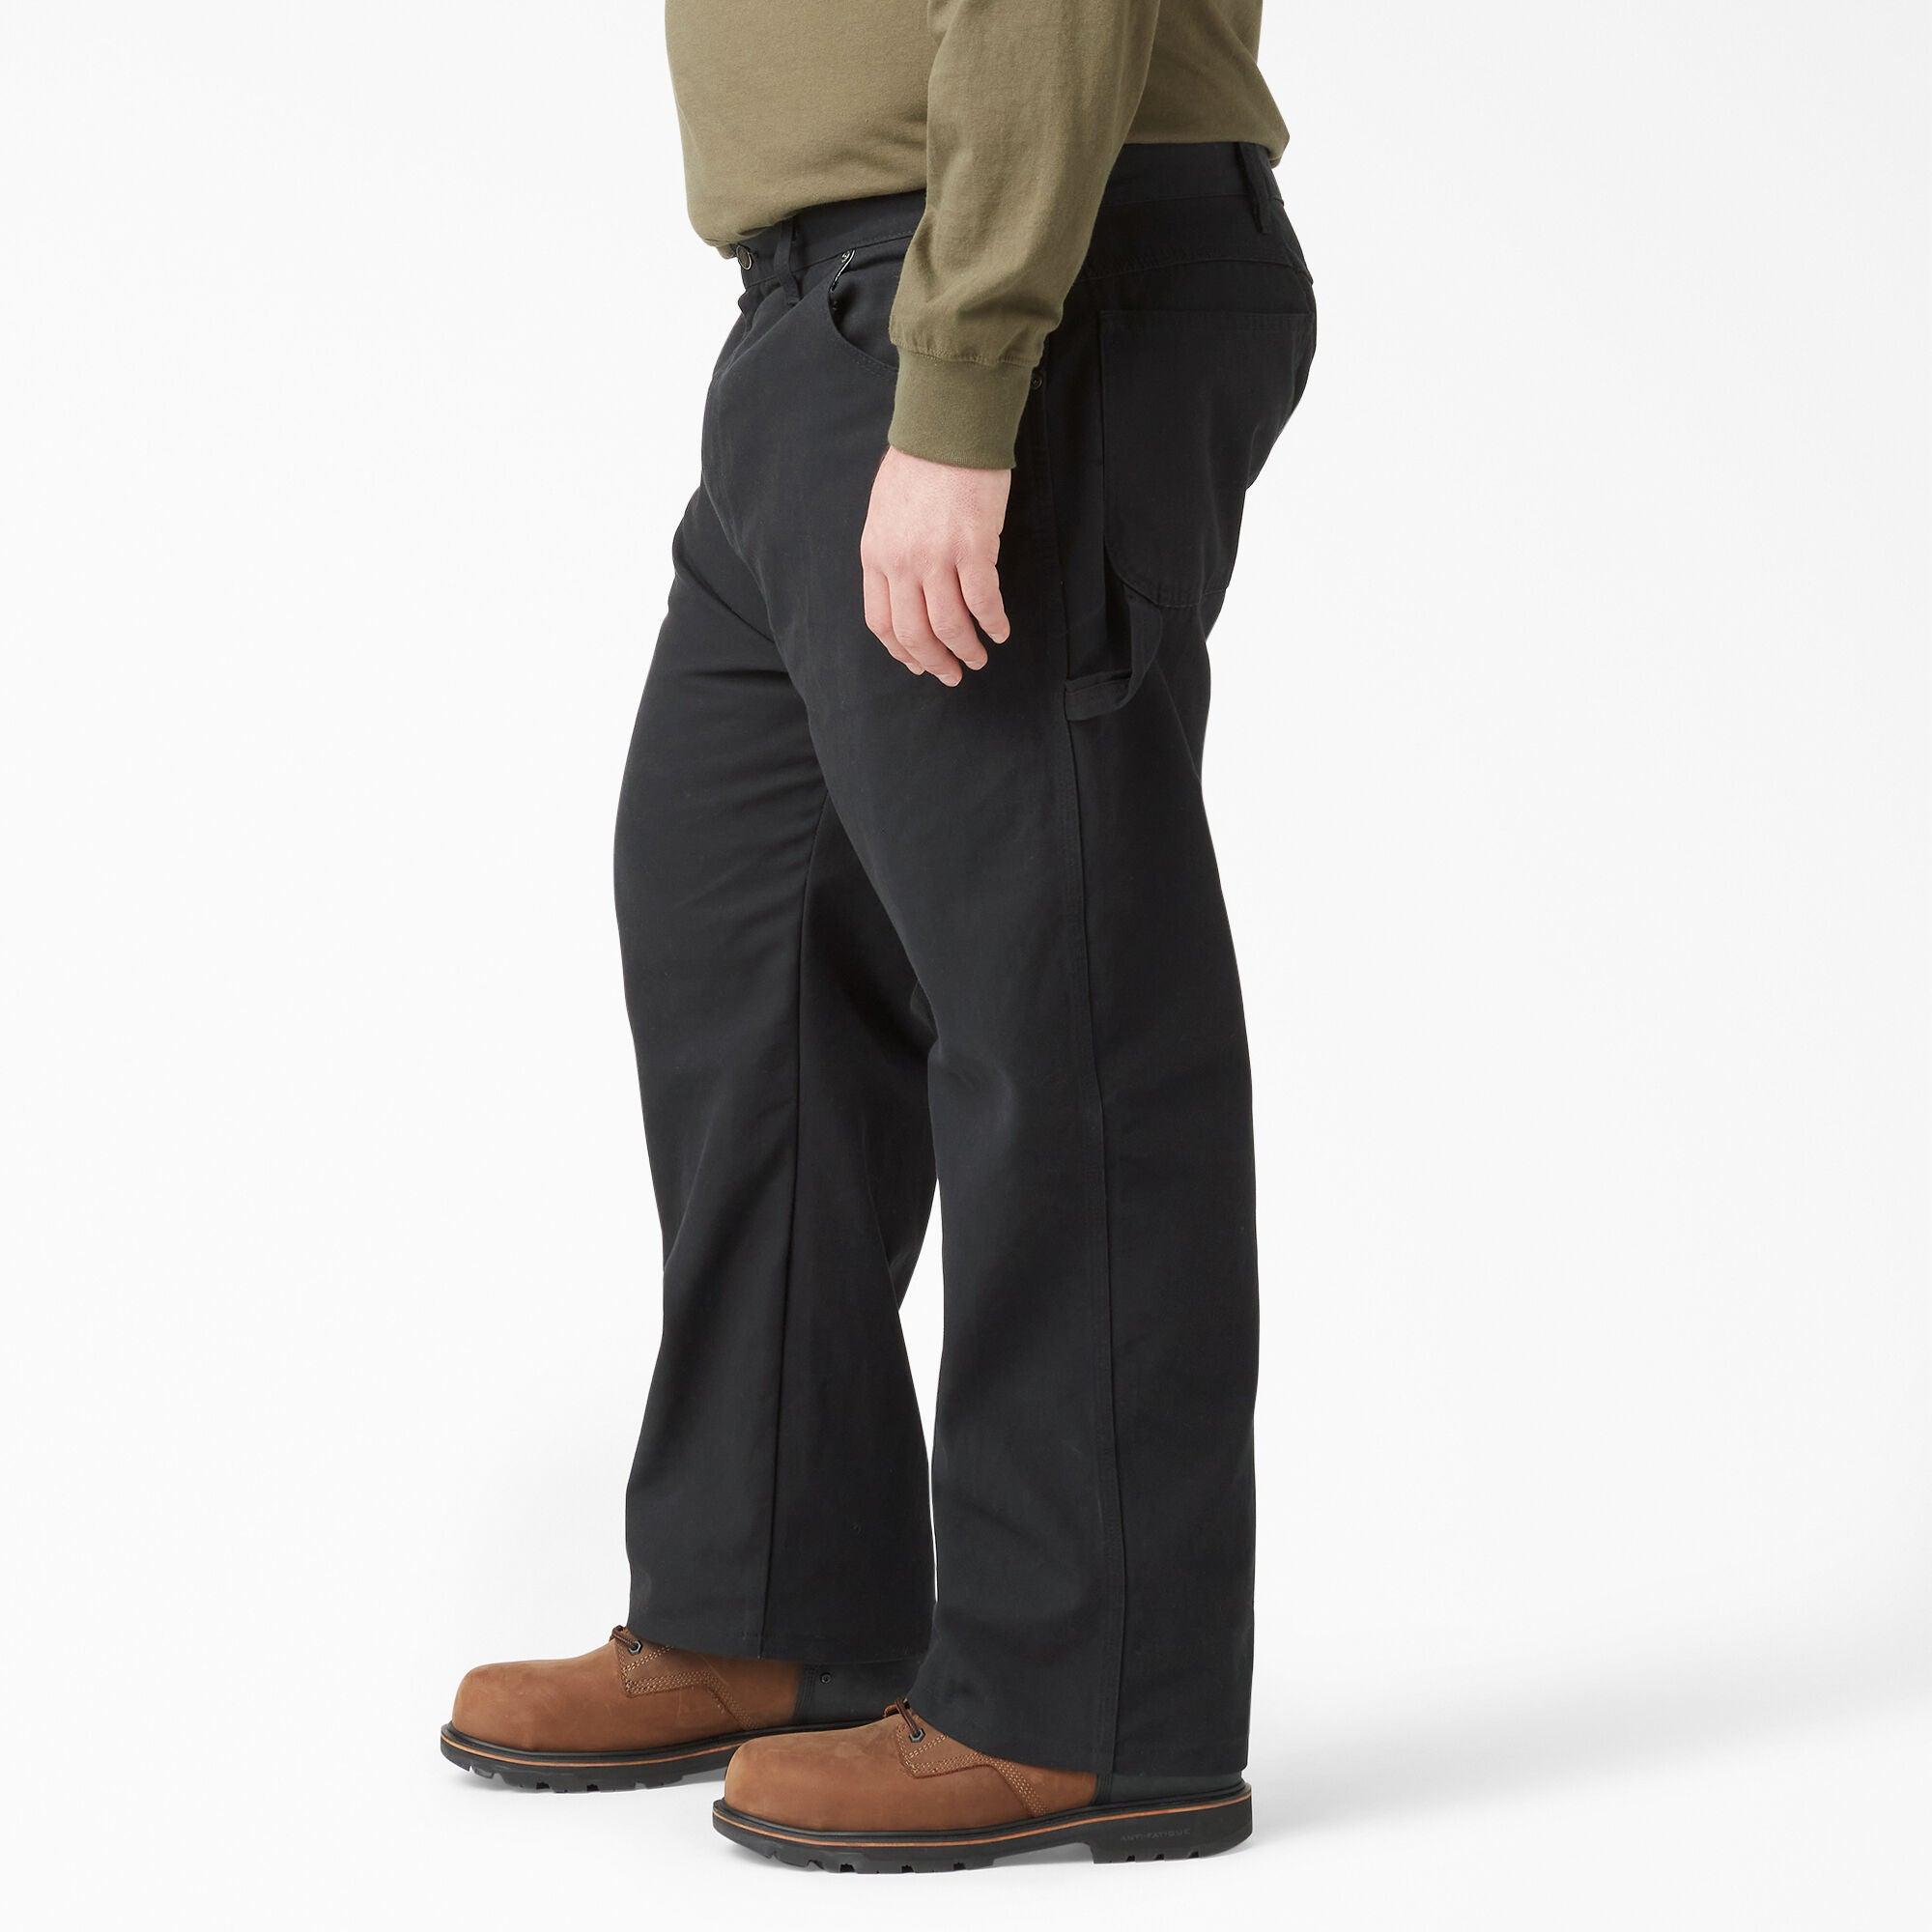 Relaxed Fit Heavyweight Duck Carpenter Pants, Black - Purpose-Built / Home of the Trades